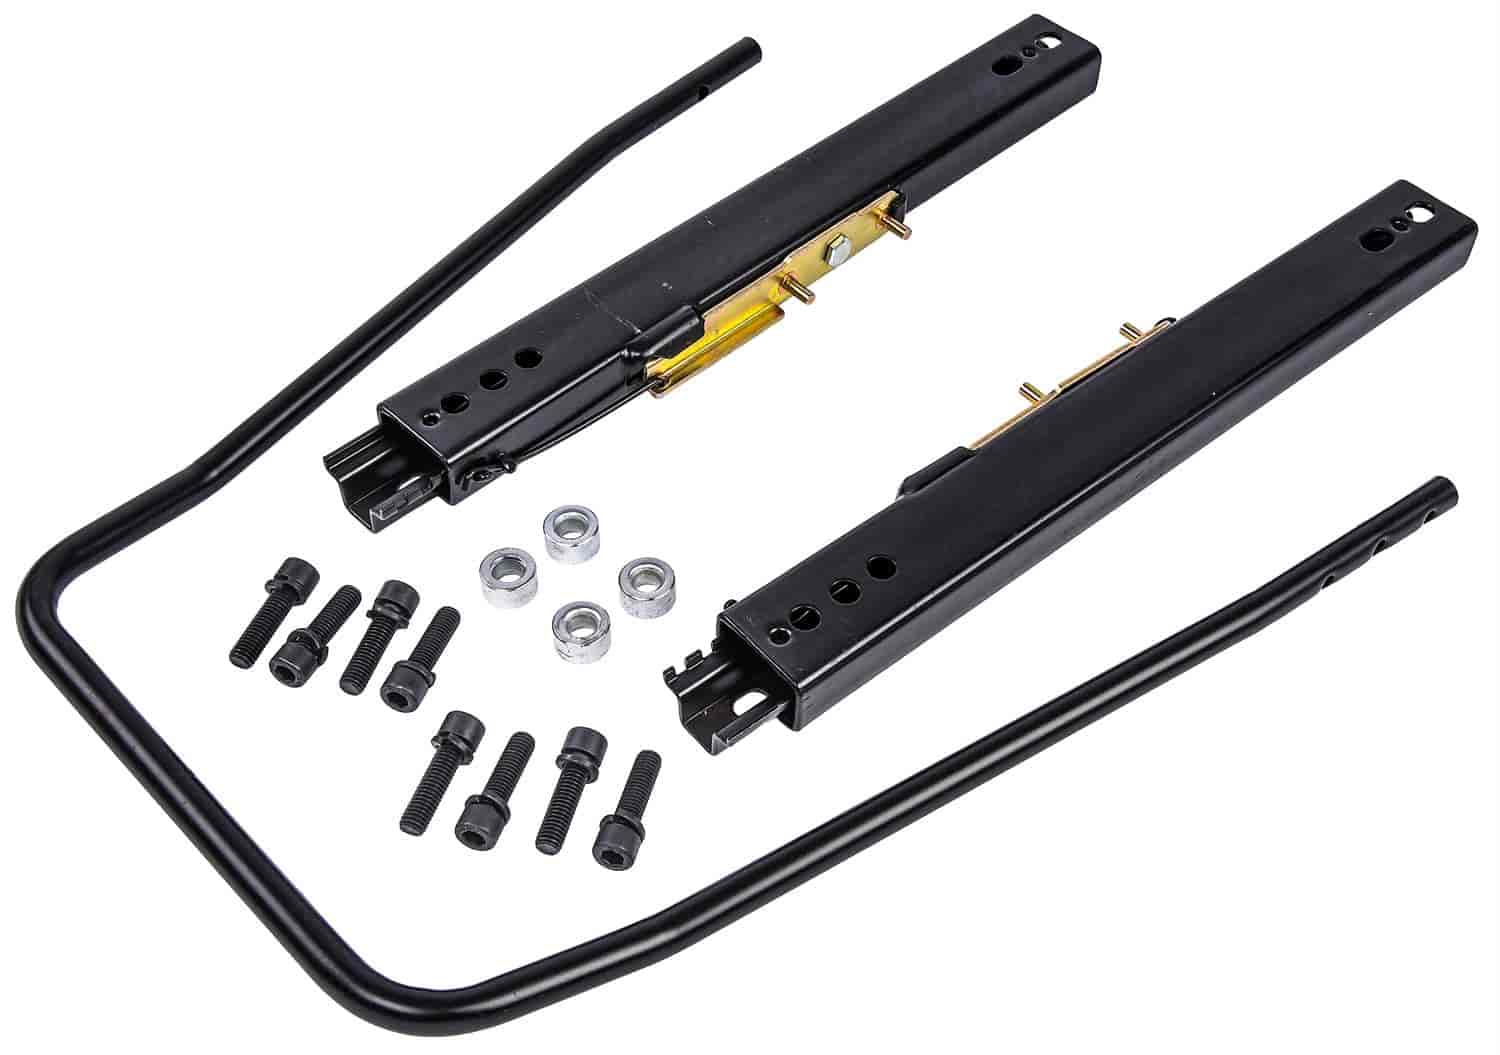 Replacement Seat Slider for JEGS GS-1 Highback Seats